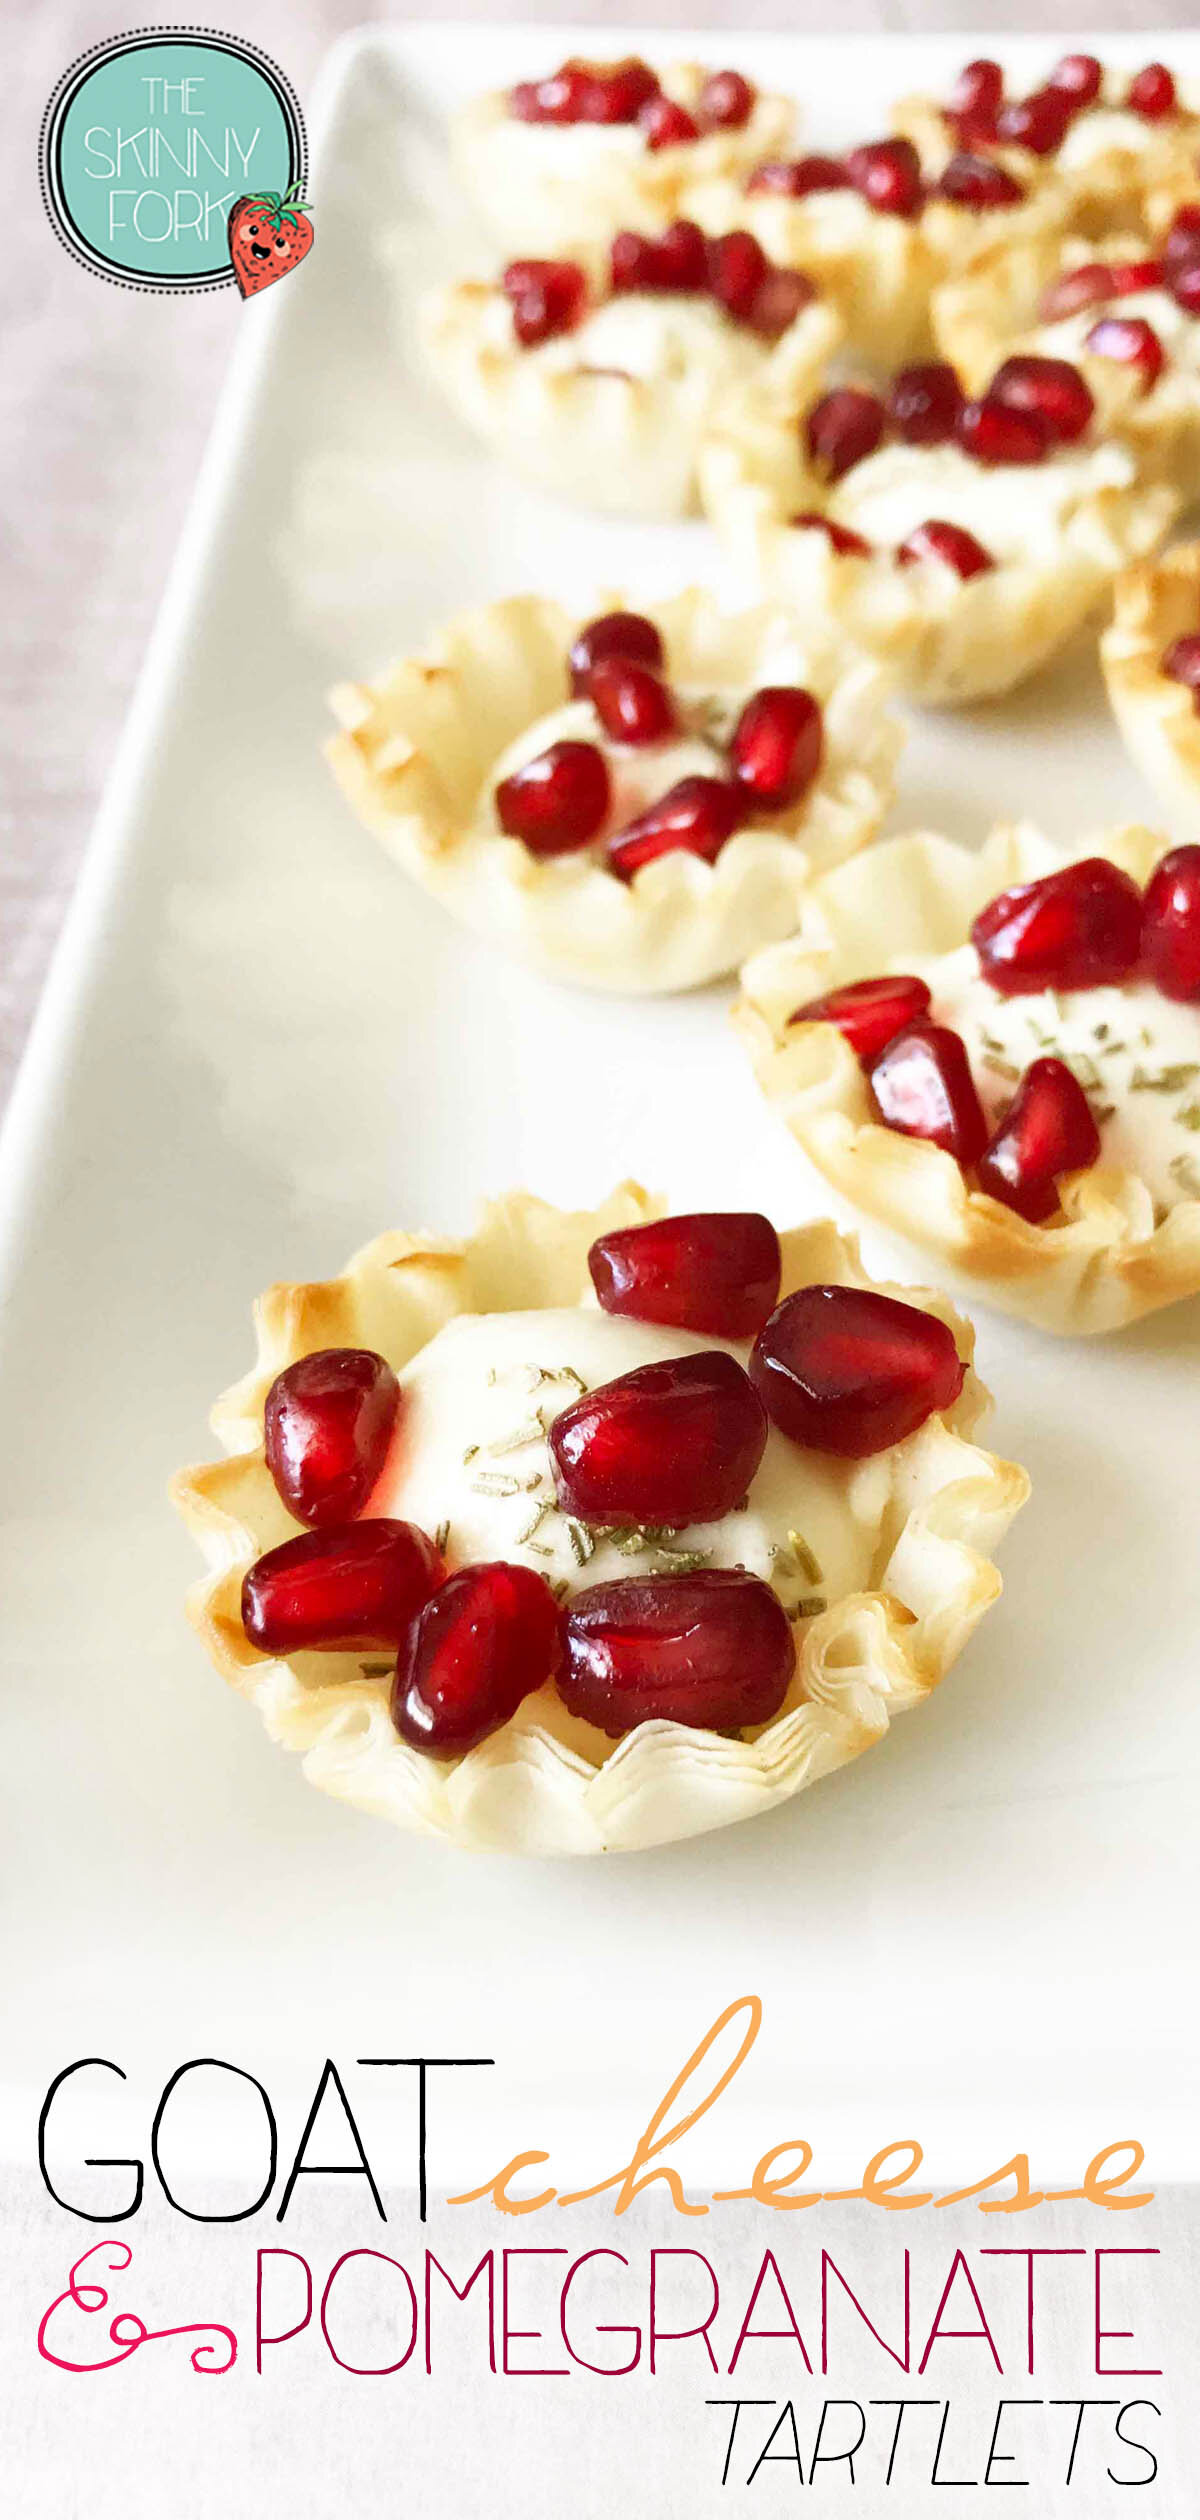 Goat Cheese & Pomegranate Tartlets